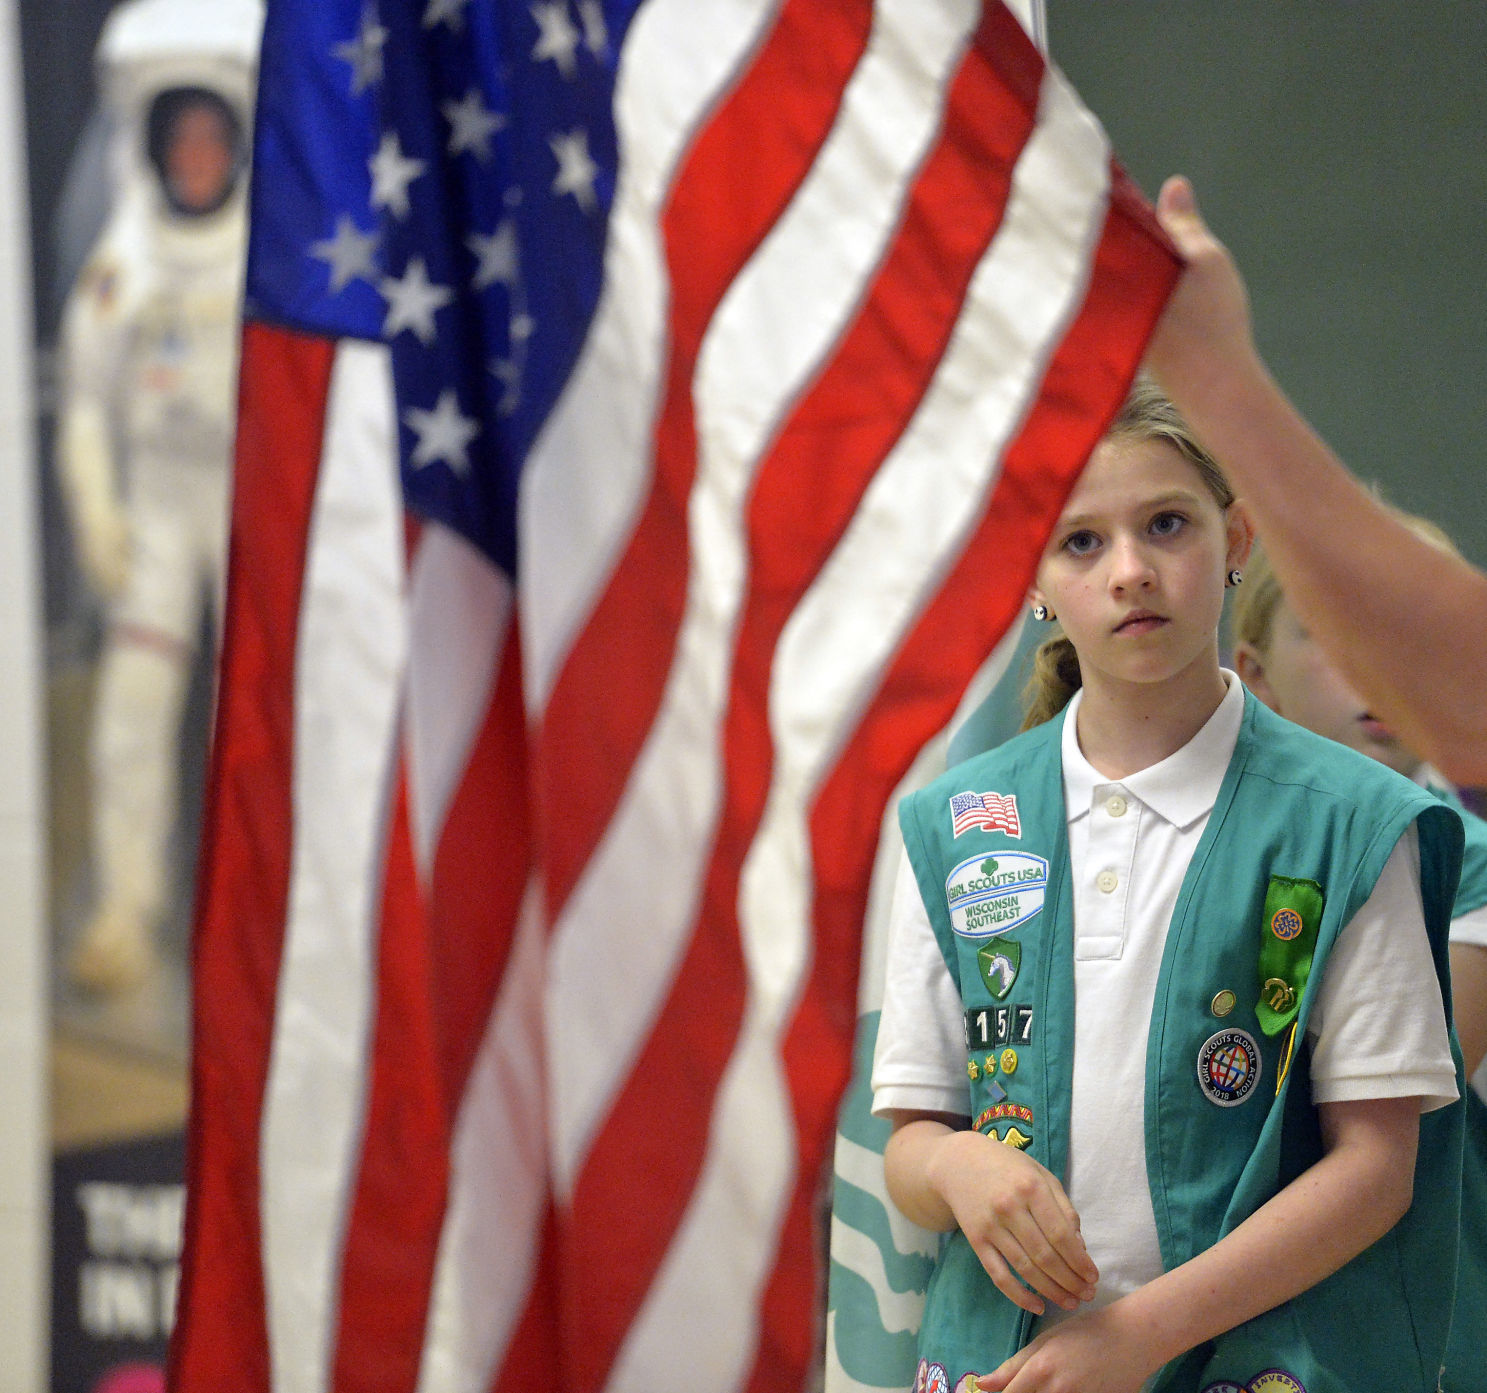 Girl Scouts celebrate 100 years of service, leadership building photo